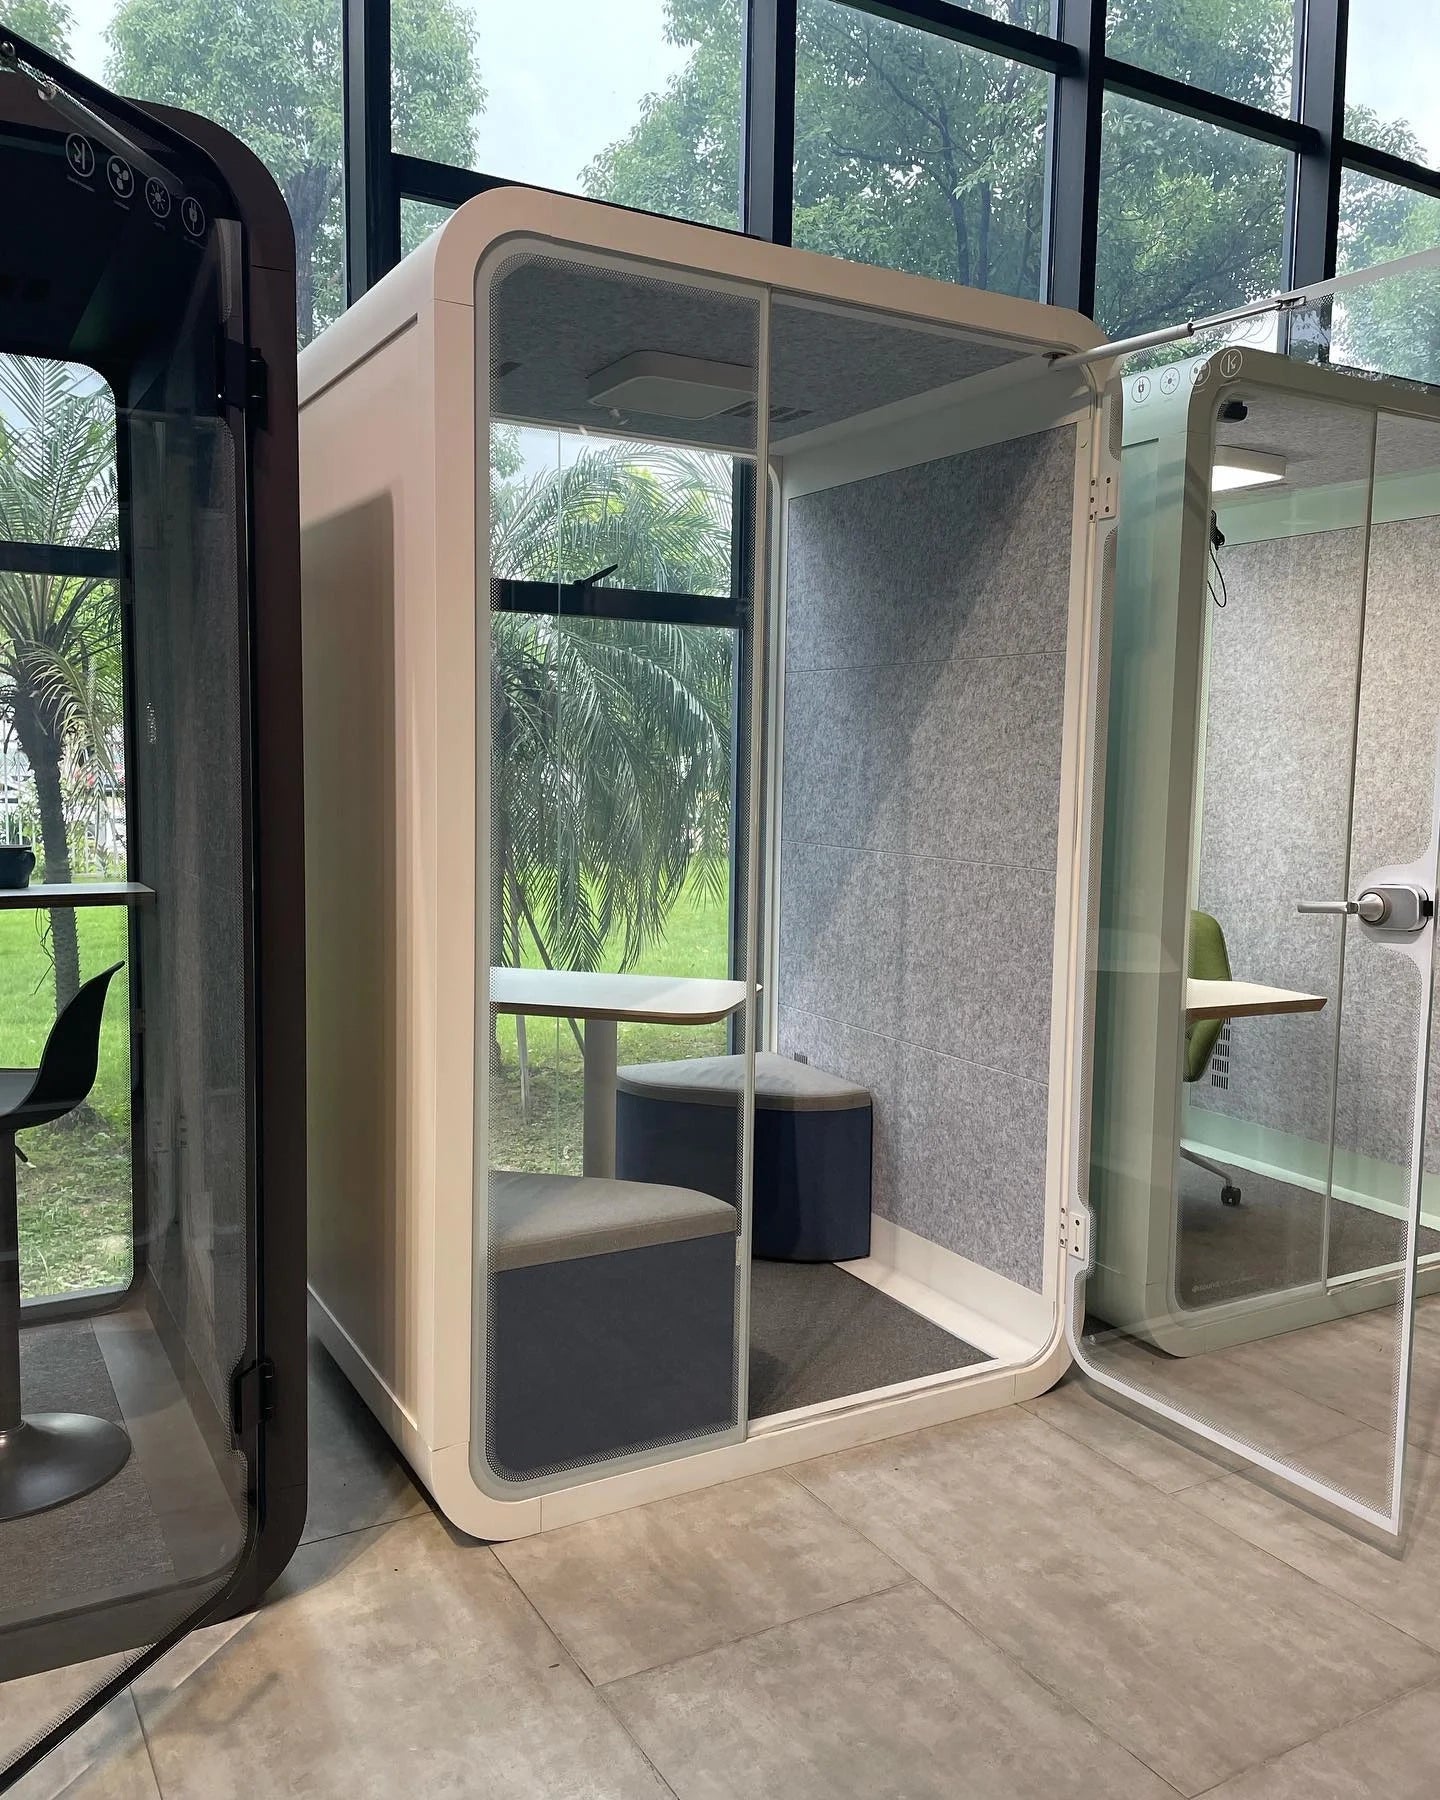 Compact PrivacyPod designed for two people, ideal for use as a soundproof phone booth, modular room, or privacy booth. This pod enhances office rooms by providing a quiet, private space for focused work, meetings, and personal focus